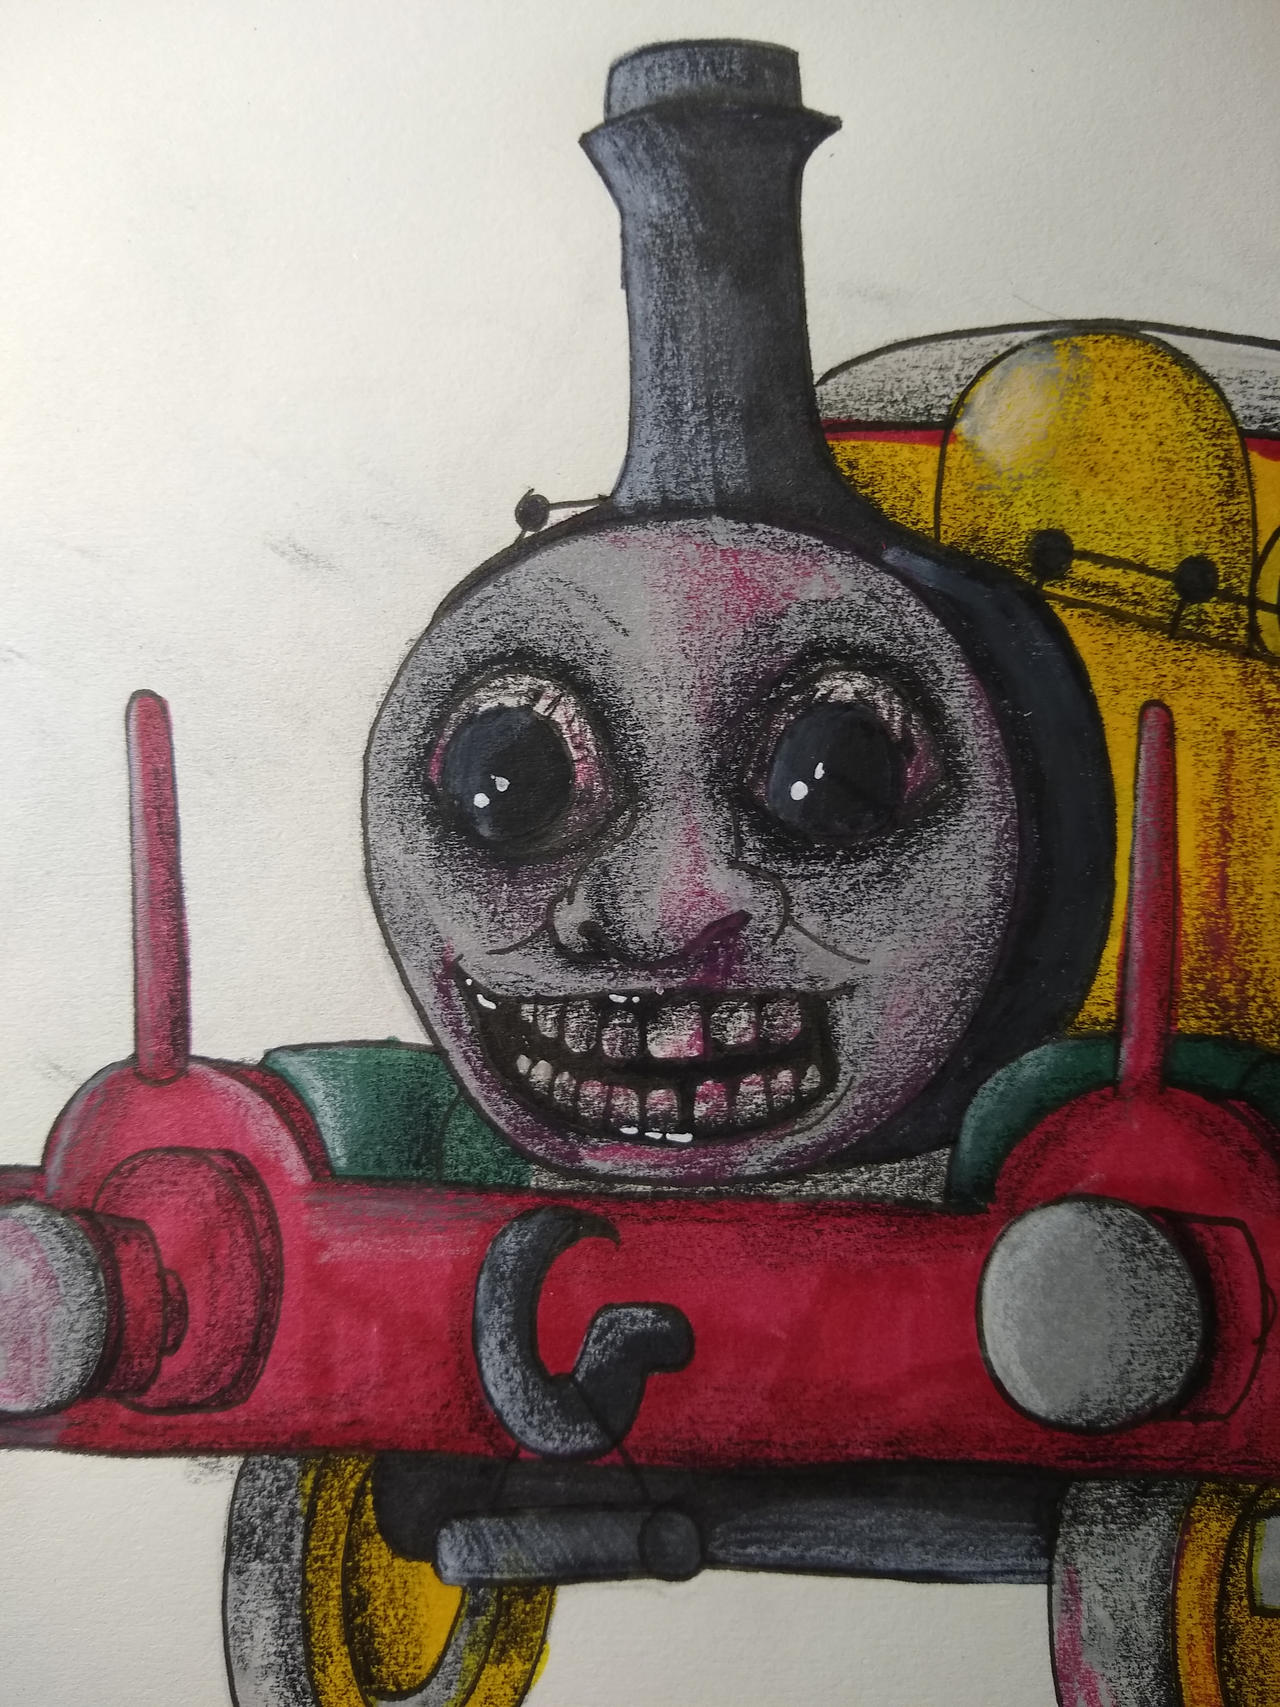 my sodor fallout remastered drawings by lolbitwithfuntime on DeviantArt